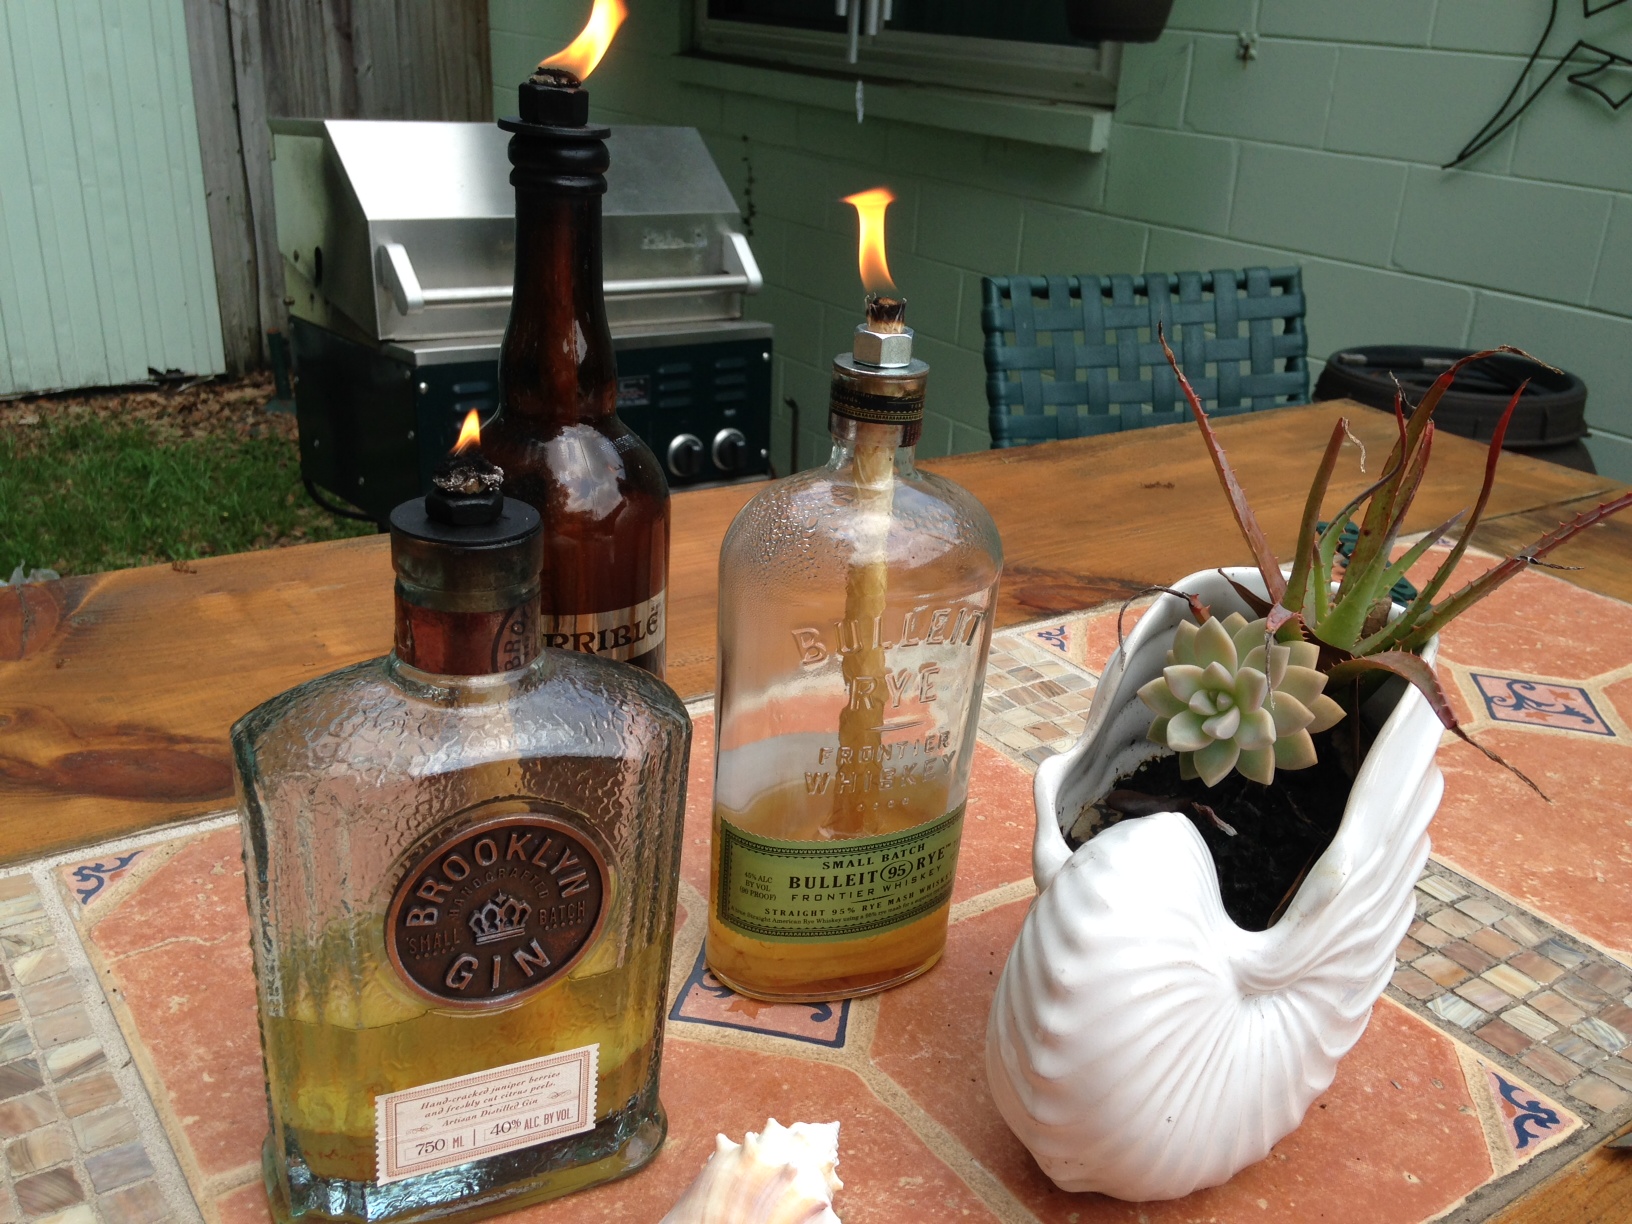 Tiki torches made from bottles